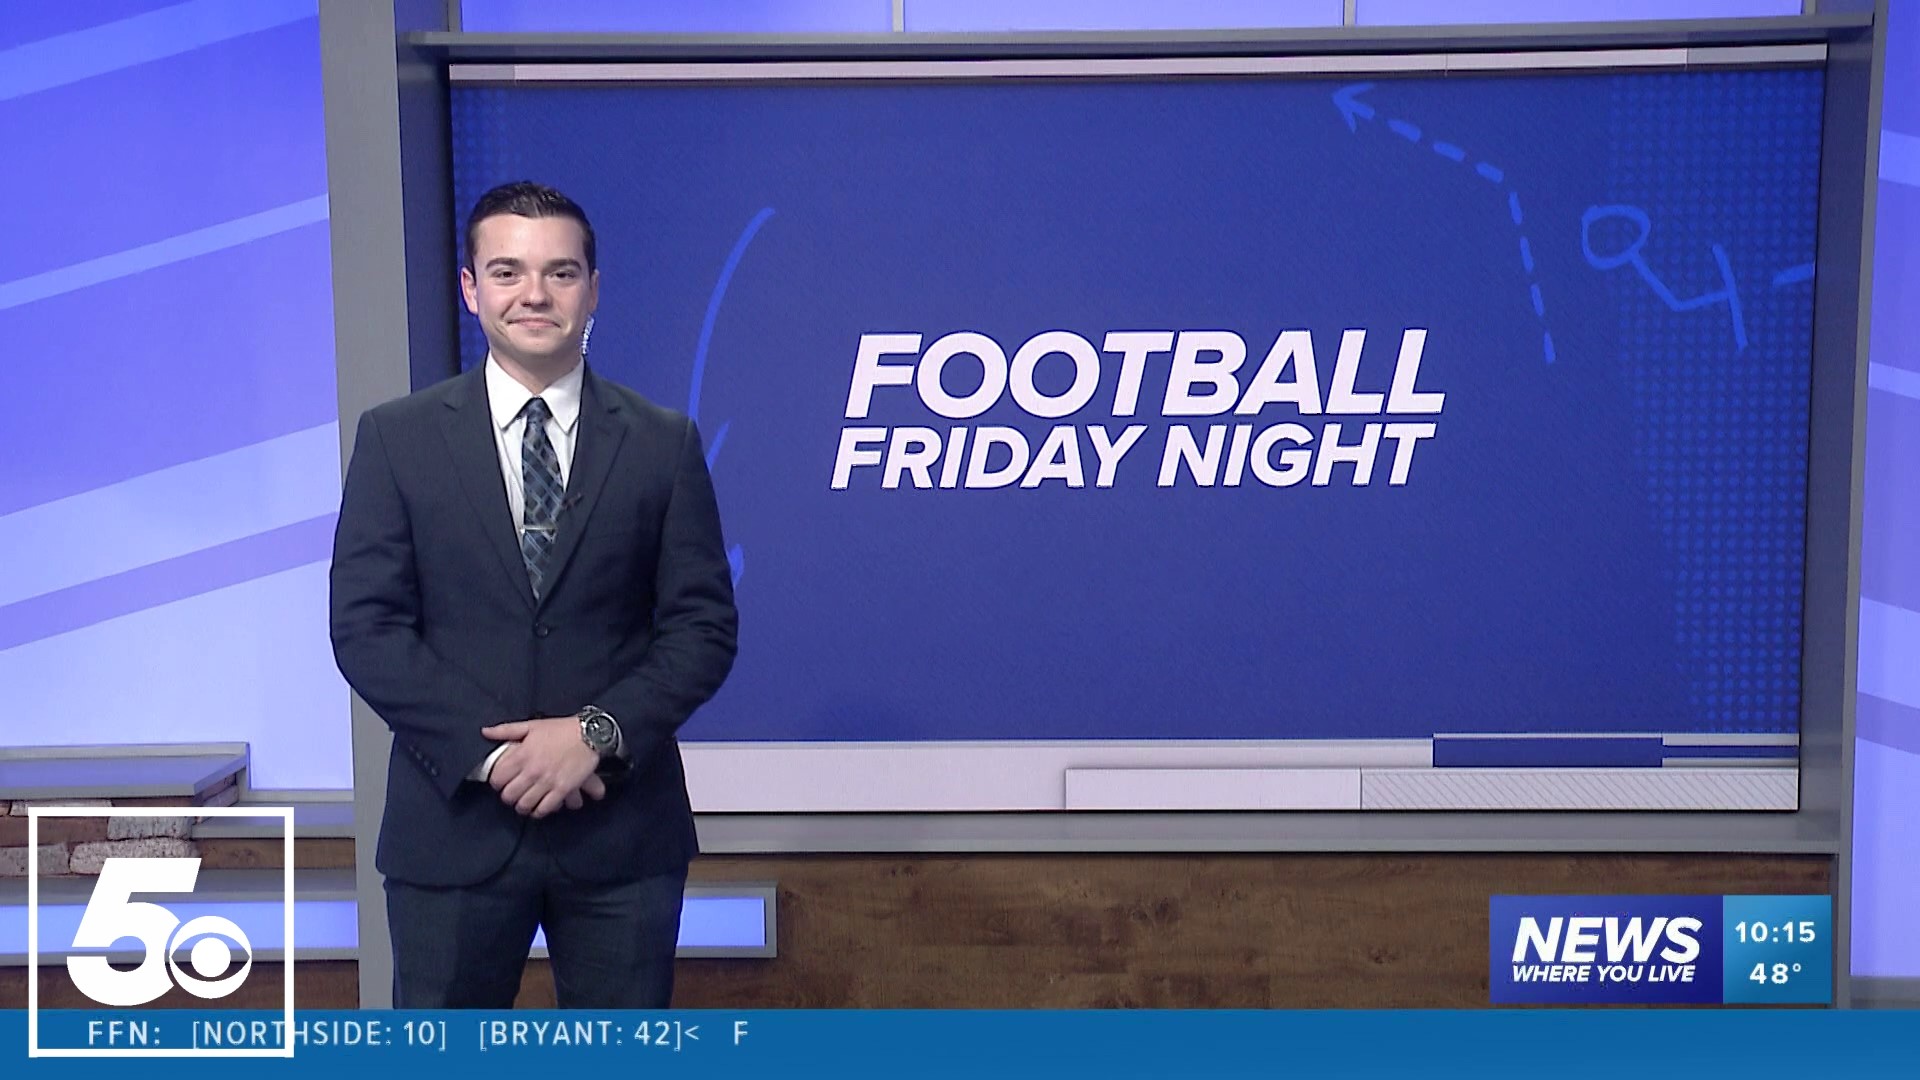 The playoffs continue in Arkansas & Oklahoma! Find out who made it to the next round in this week's Football Friday Night.